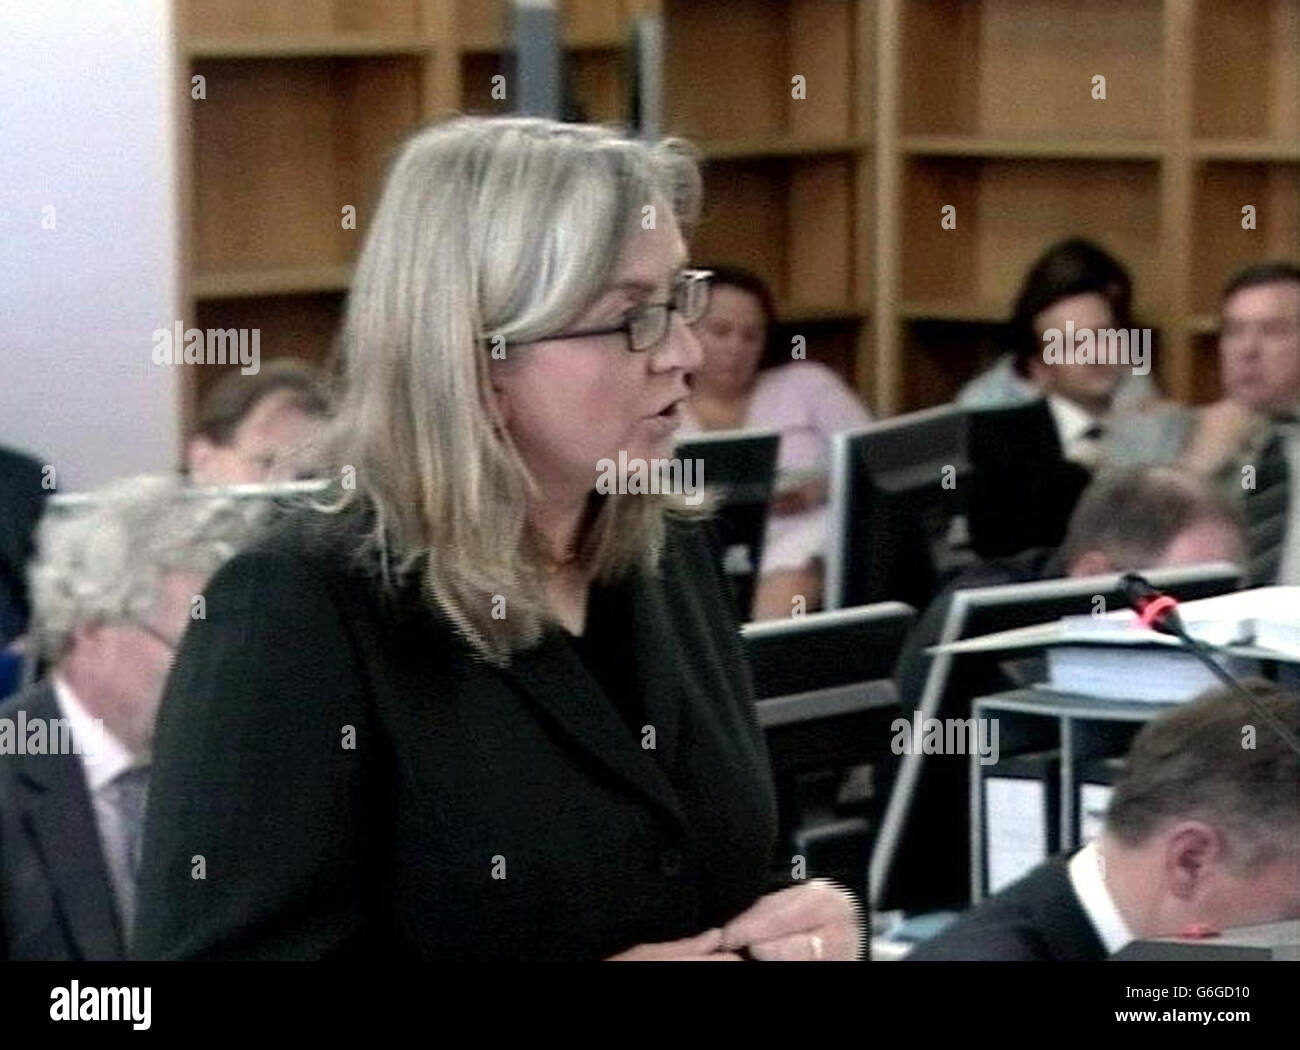 Heather Rogers, counsel for BBC journalist Andrew Gilligan, making her closing statement to the Hutton Inquiry at the High Court in London. Lord Hutton has been inquiring into the events surrounding the apparent suicide of weapons expert Dr David Kelly who was at the centre of a row between the Government and the BBC after admitting talking to journalist Andrew Gilligan, who reported that the Government had 'sexed up' its Iraq dossier. Stock Photo